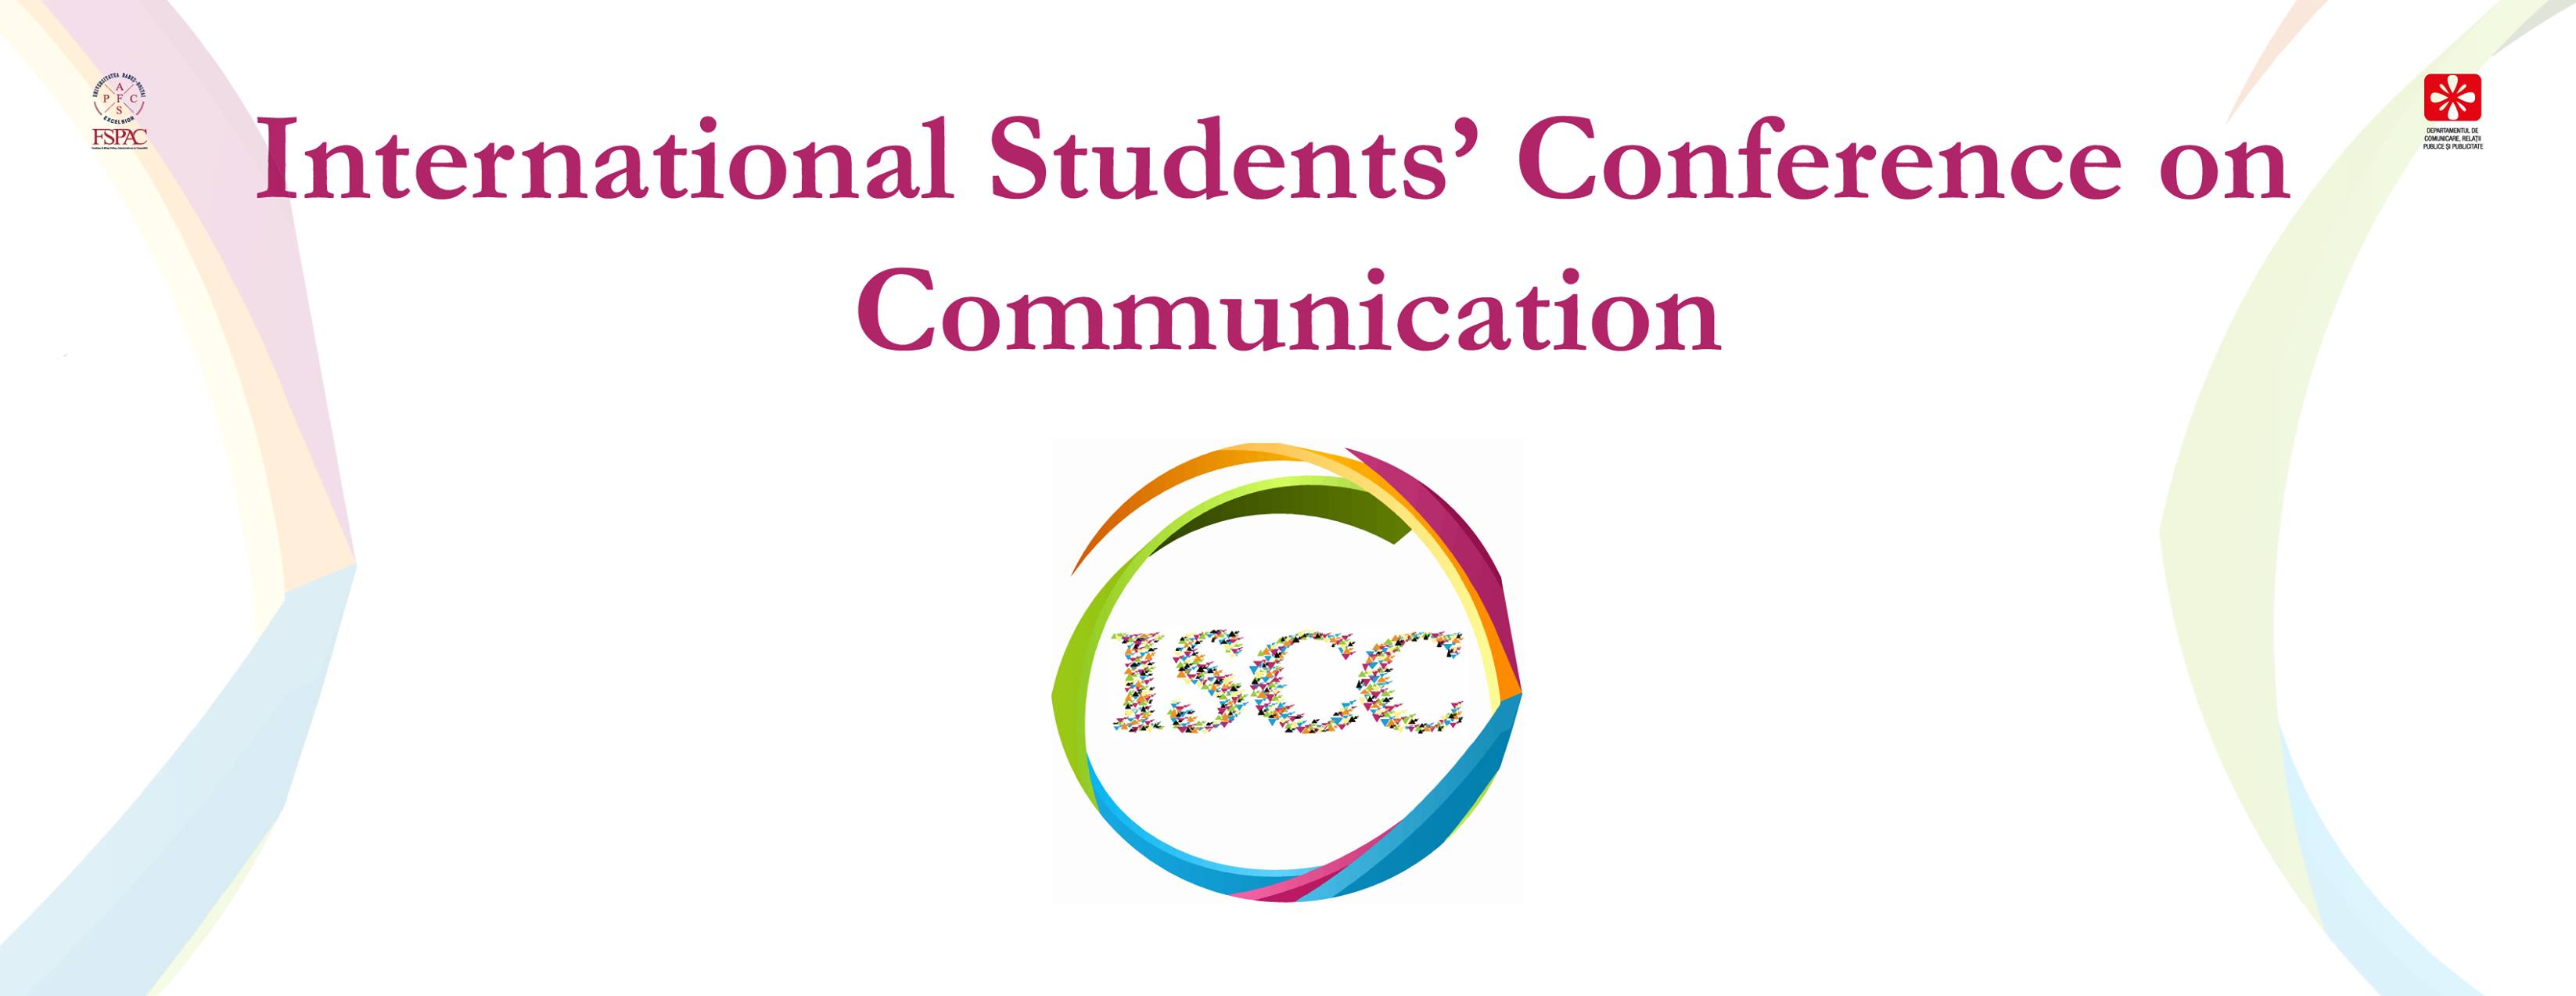 The International Students' Conference on Communication is an annual event that aims to support students in their endeavor to develop theoretical and empirical valuable research. . The goal of the conference is that of creating a specialized knowledge framework in which the exchange of updated information on communication domain is properly valued. The conference is an event organized for bachelor, master and doctoral students. 